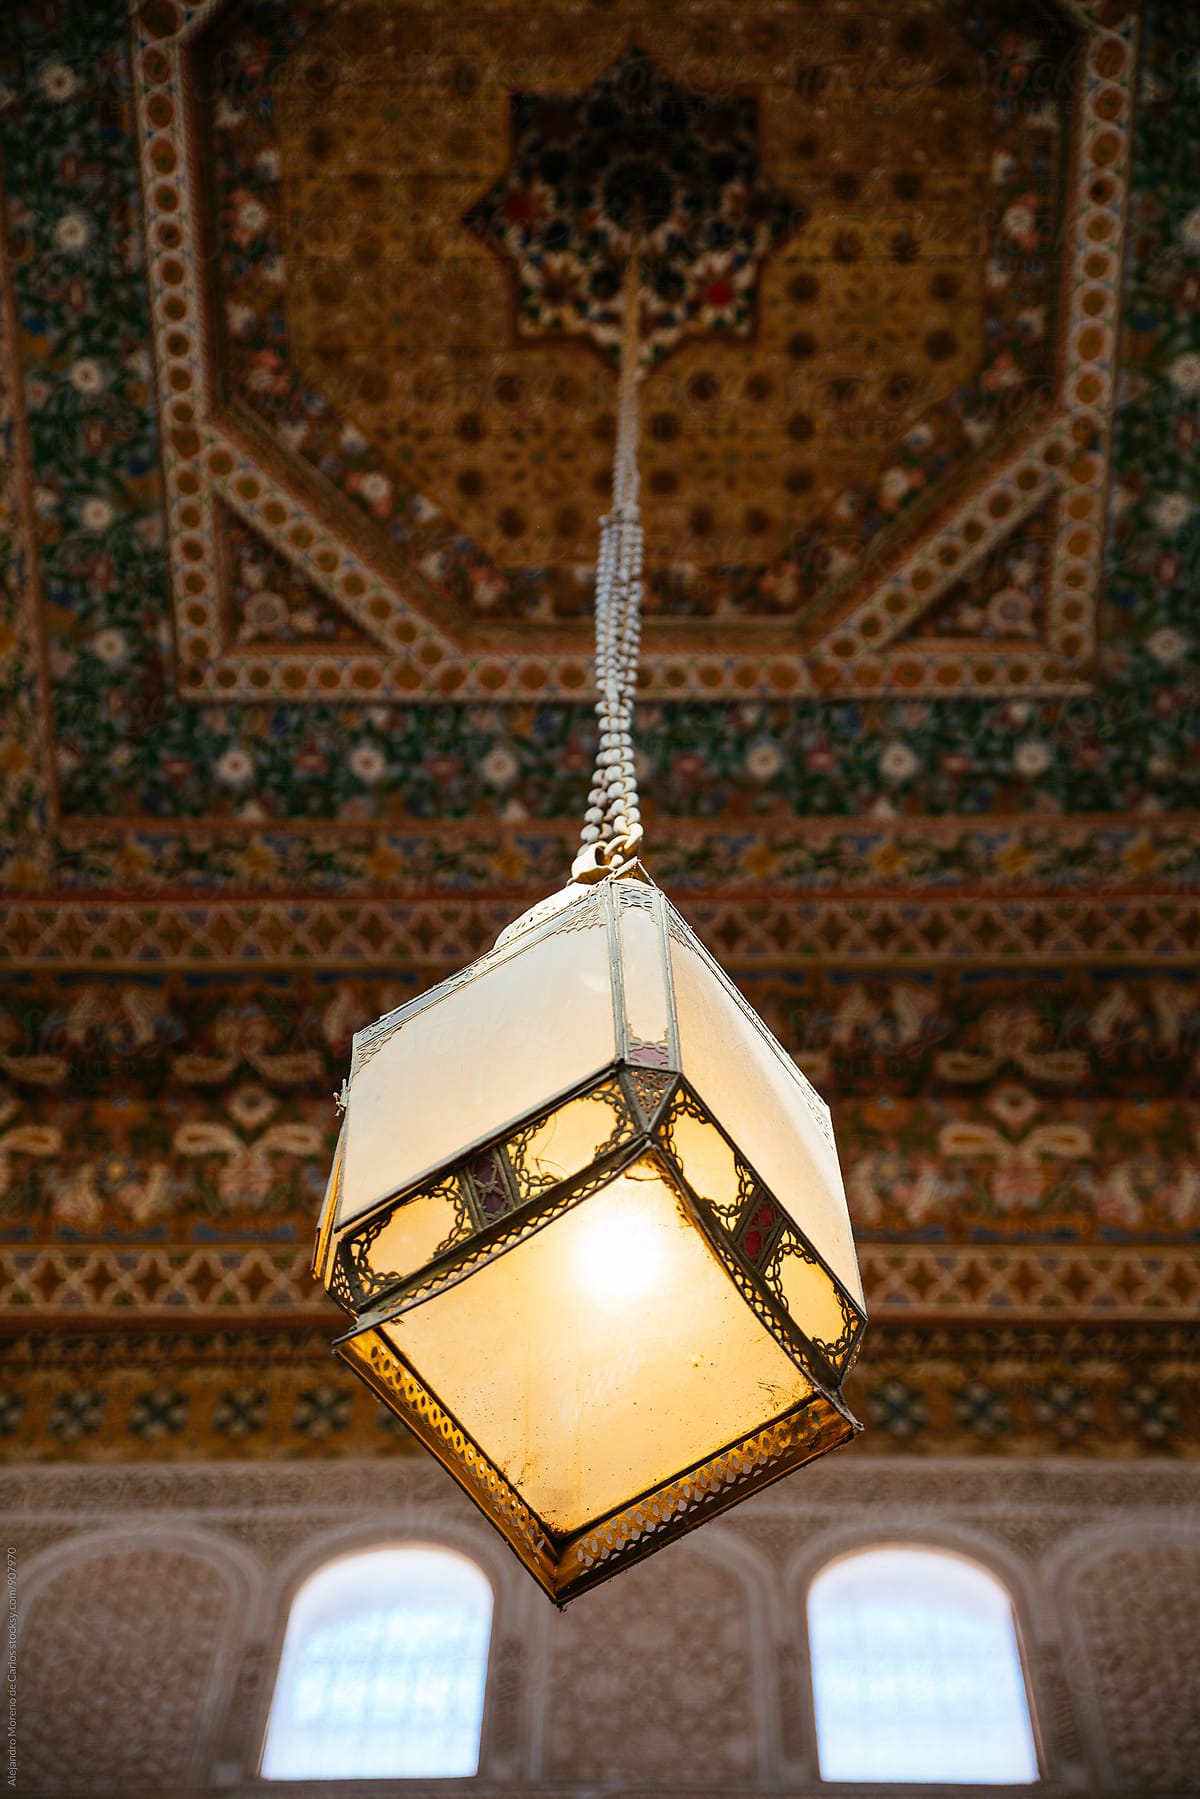 Lamp hanging in a room in Bahia Palace. Marrakech, Morocco